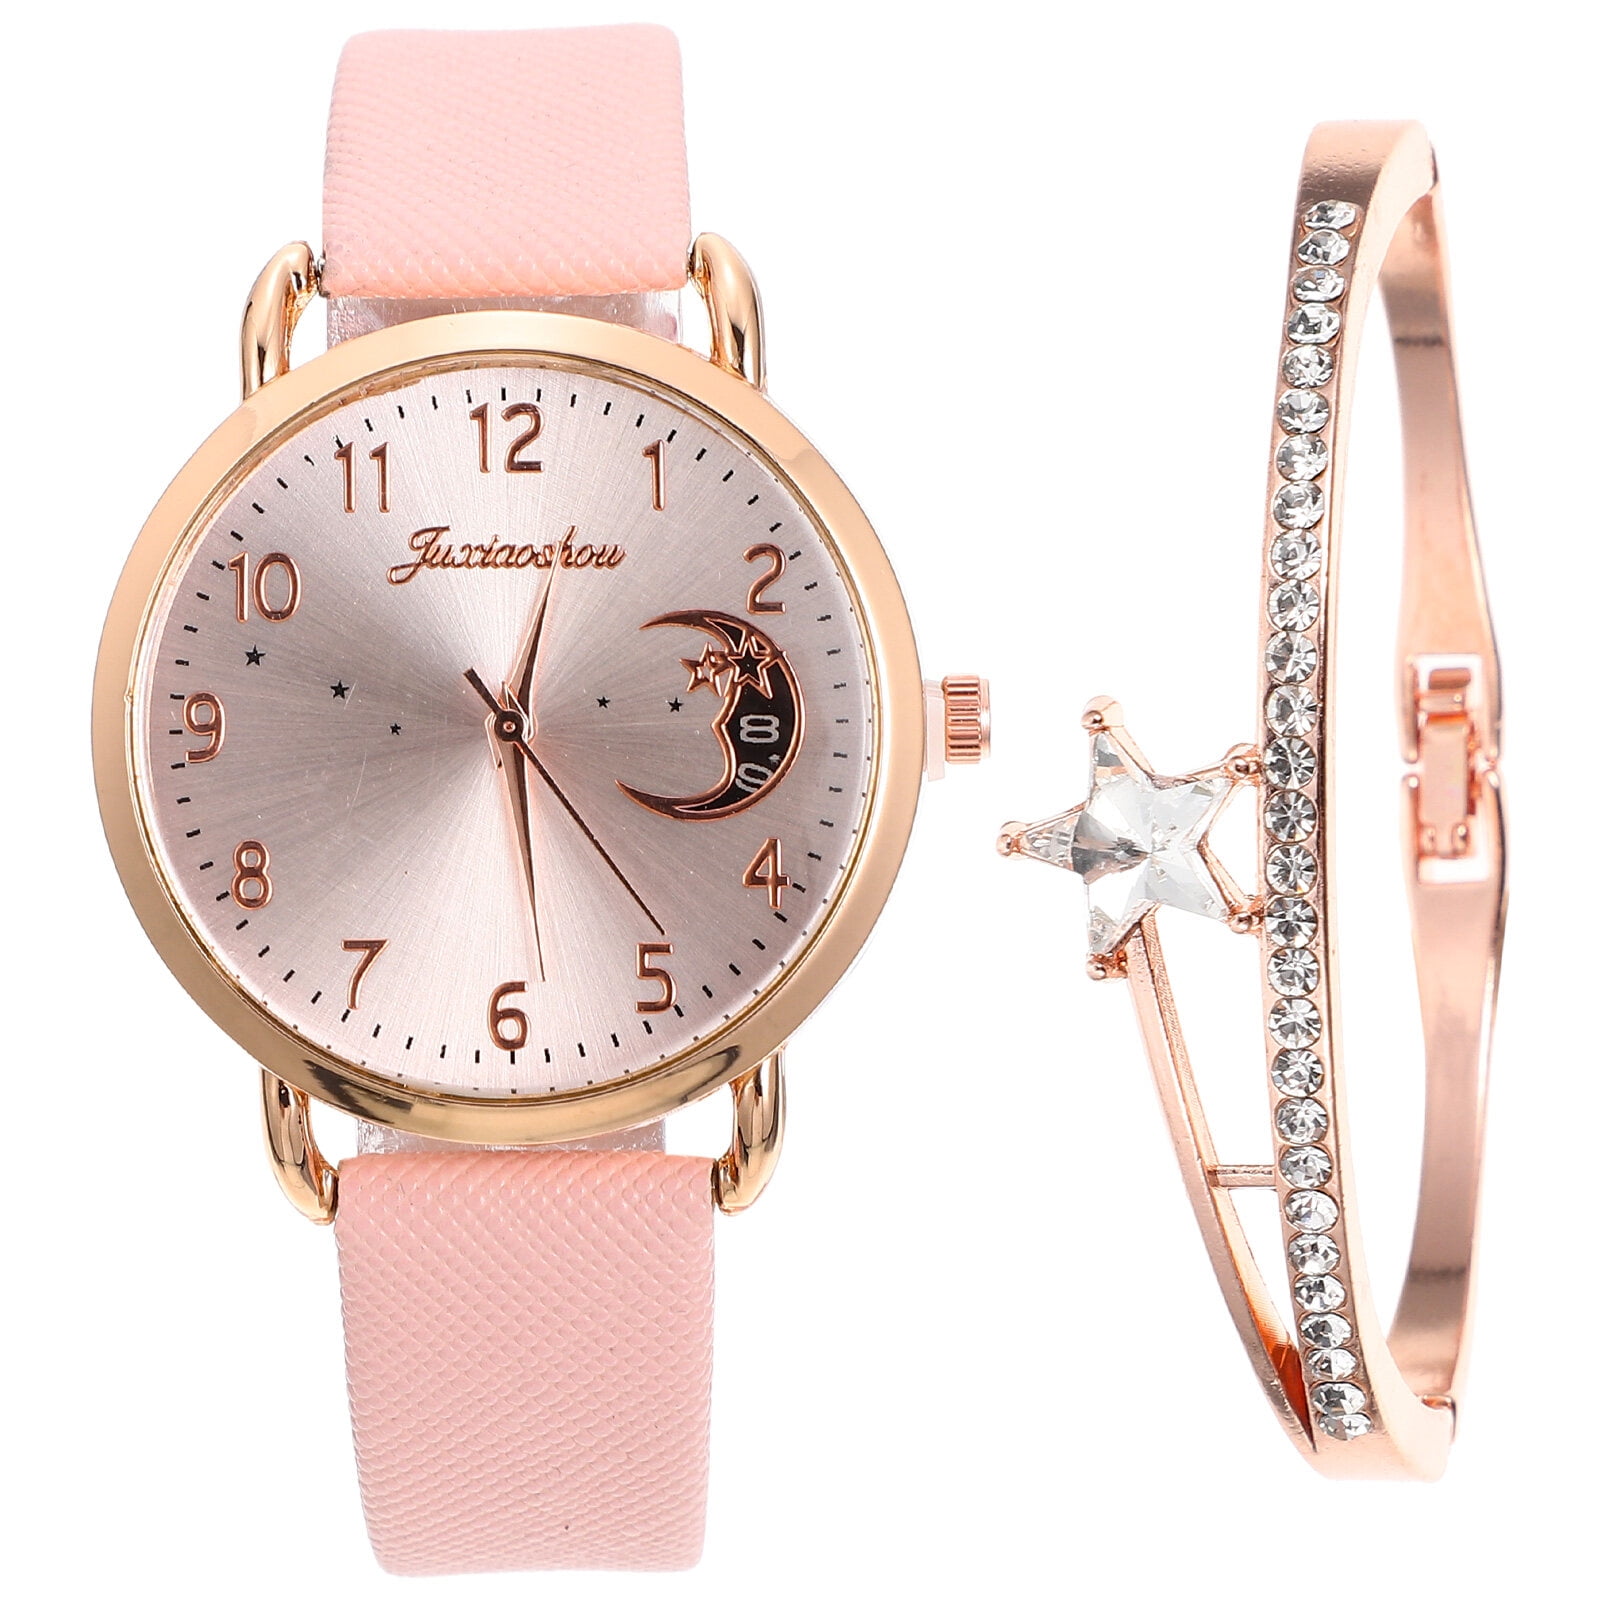 Ollie Olland Watch and Bracelet Set - gift for wife - Ladies designer watch  and bracelet set - female present ideas - rose gold gift set - birthday  gifts for her